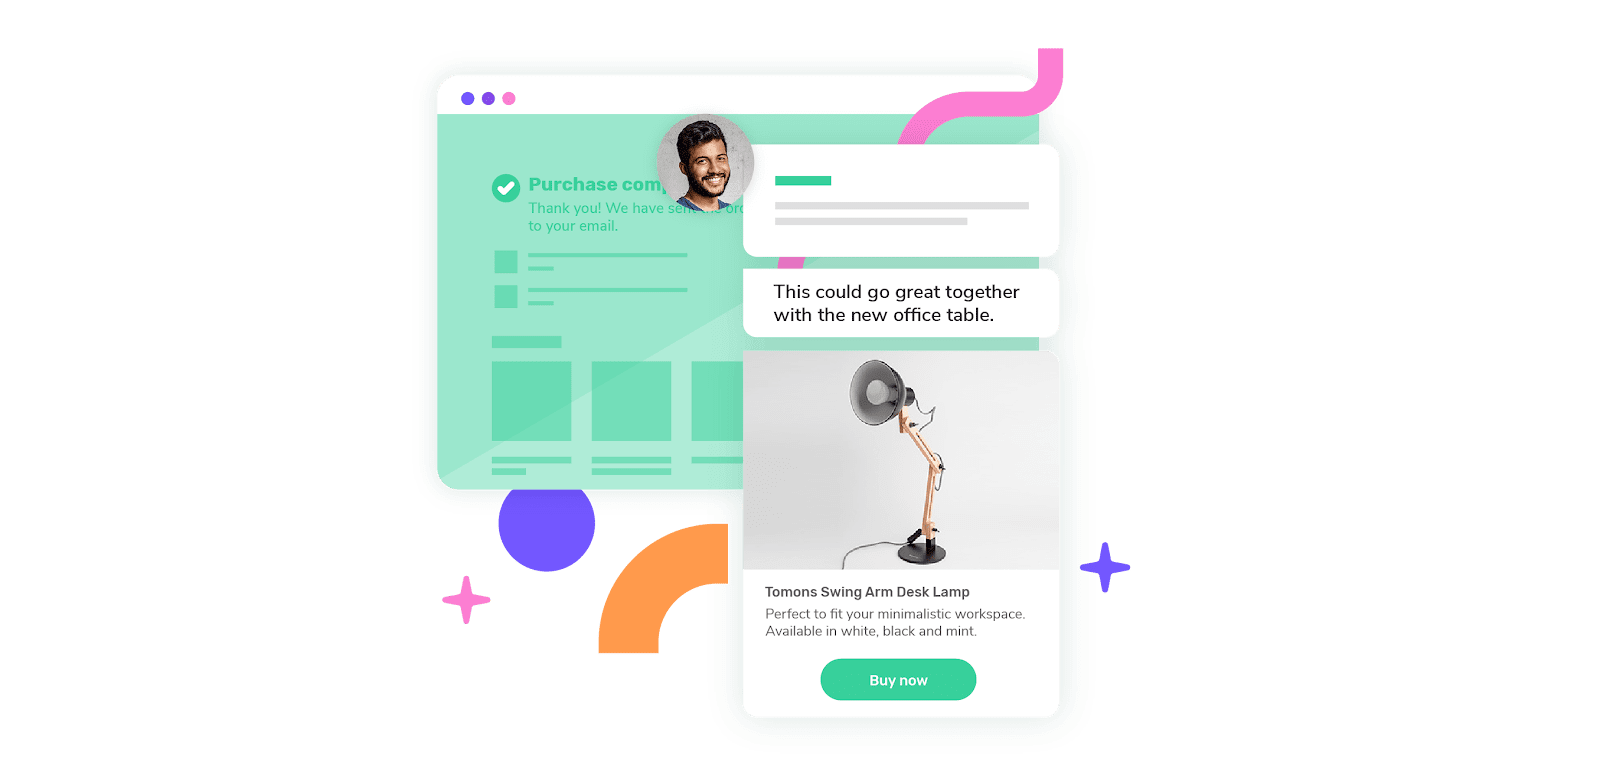 Utilize Chatbots and Live Chat for Lead Generation